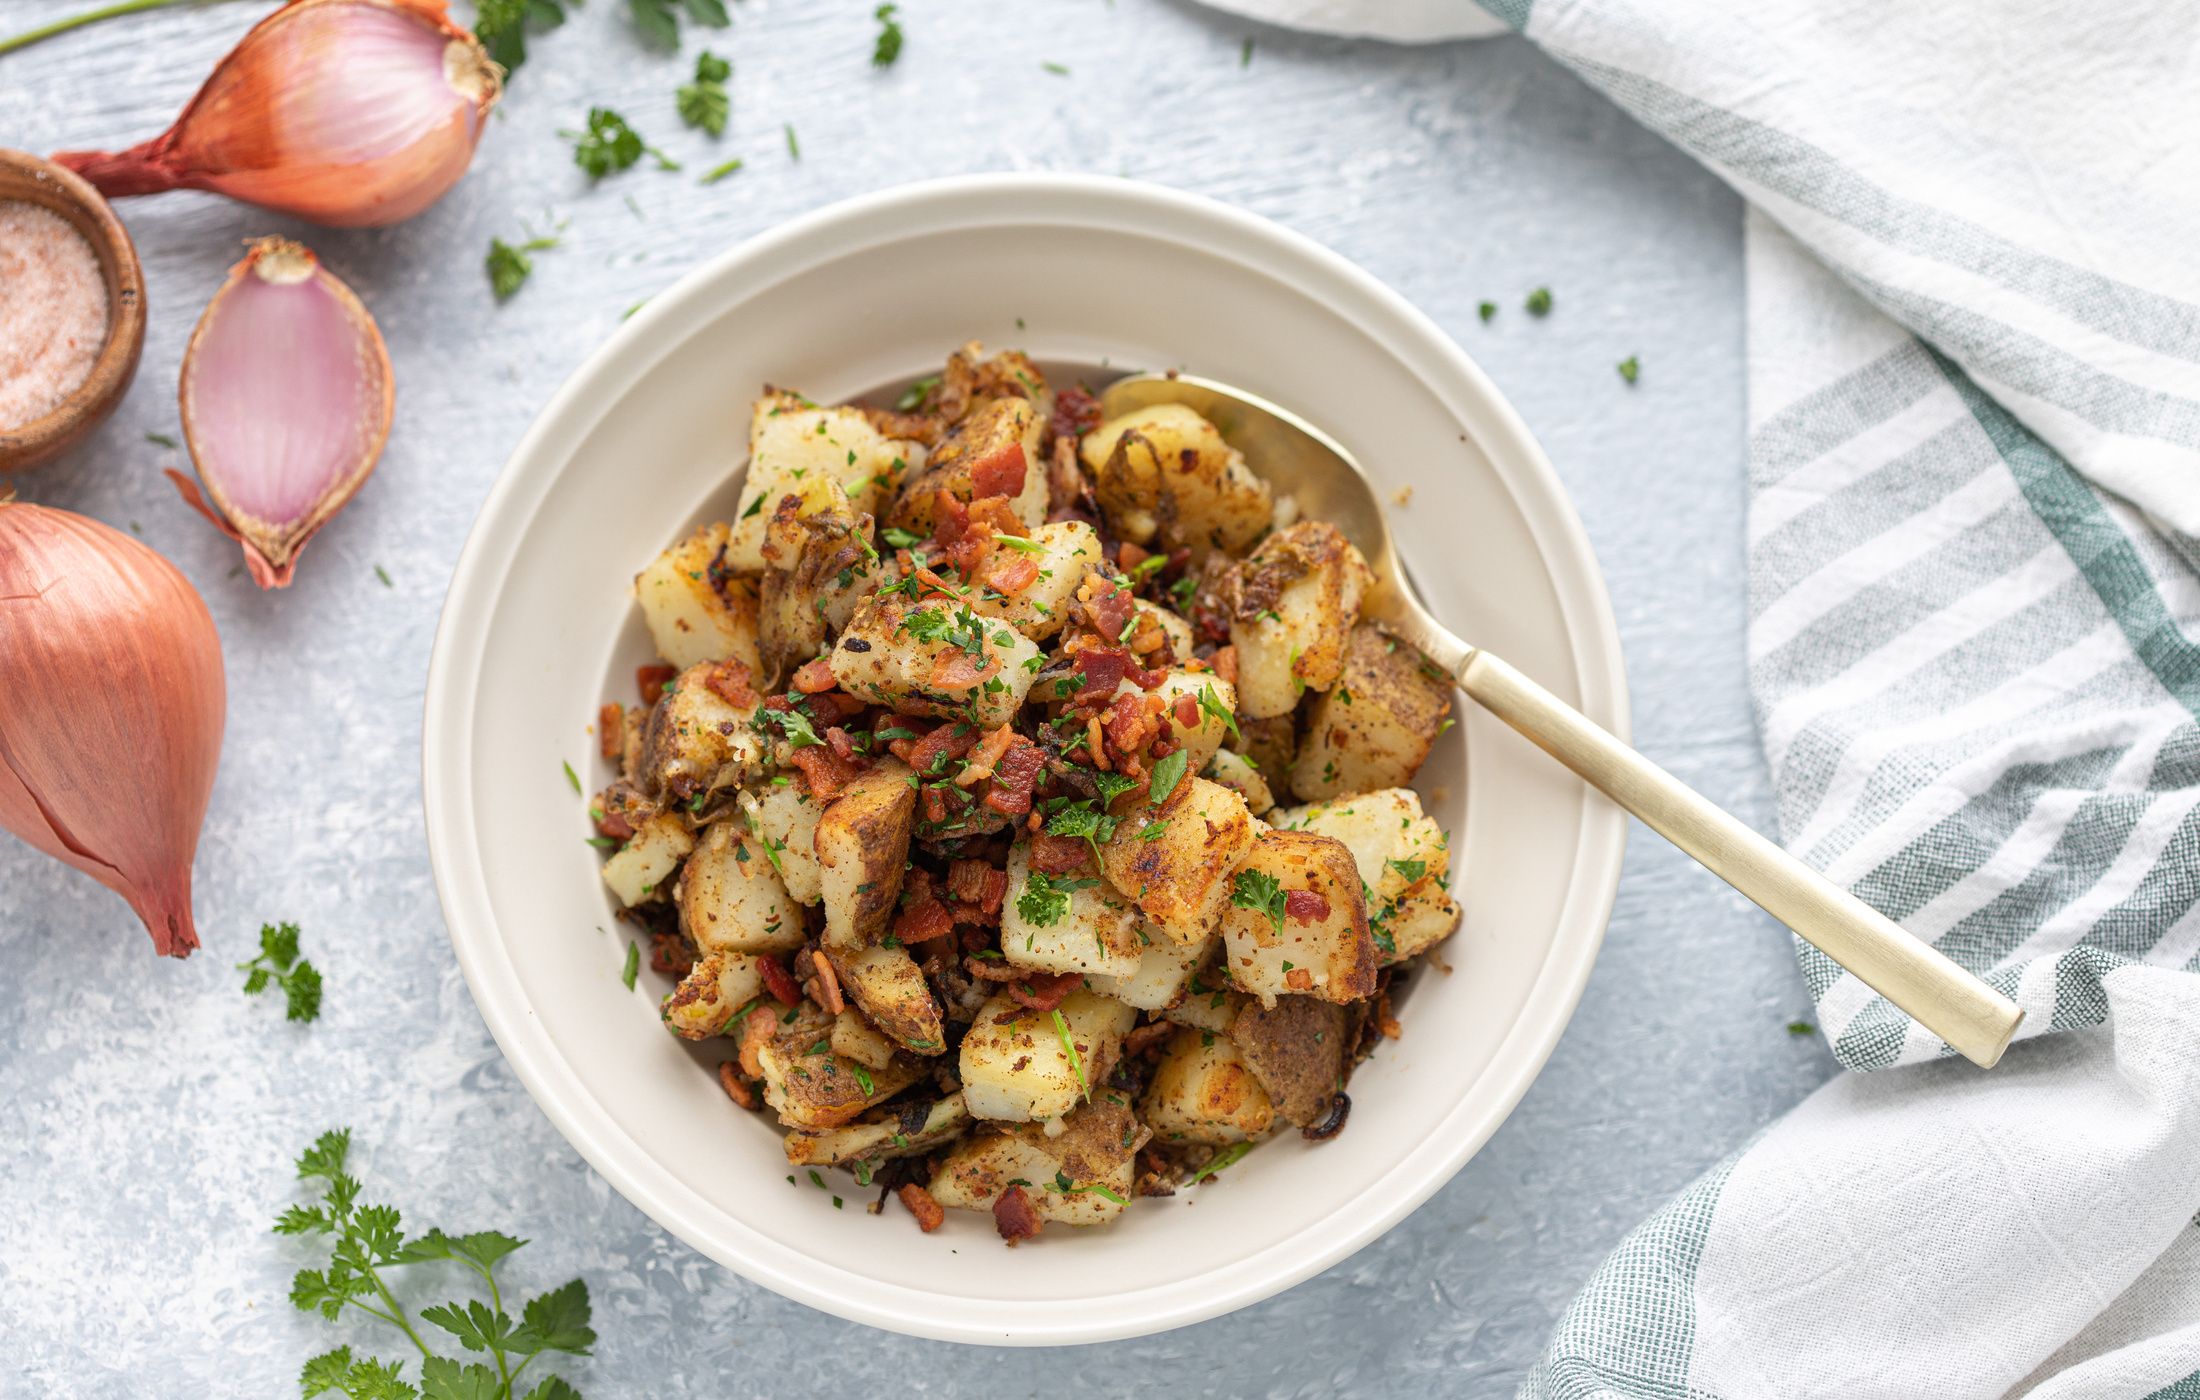 Home-Fried Potatoes with Bacon and Shallots